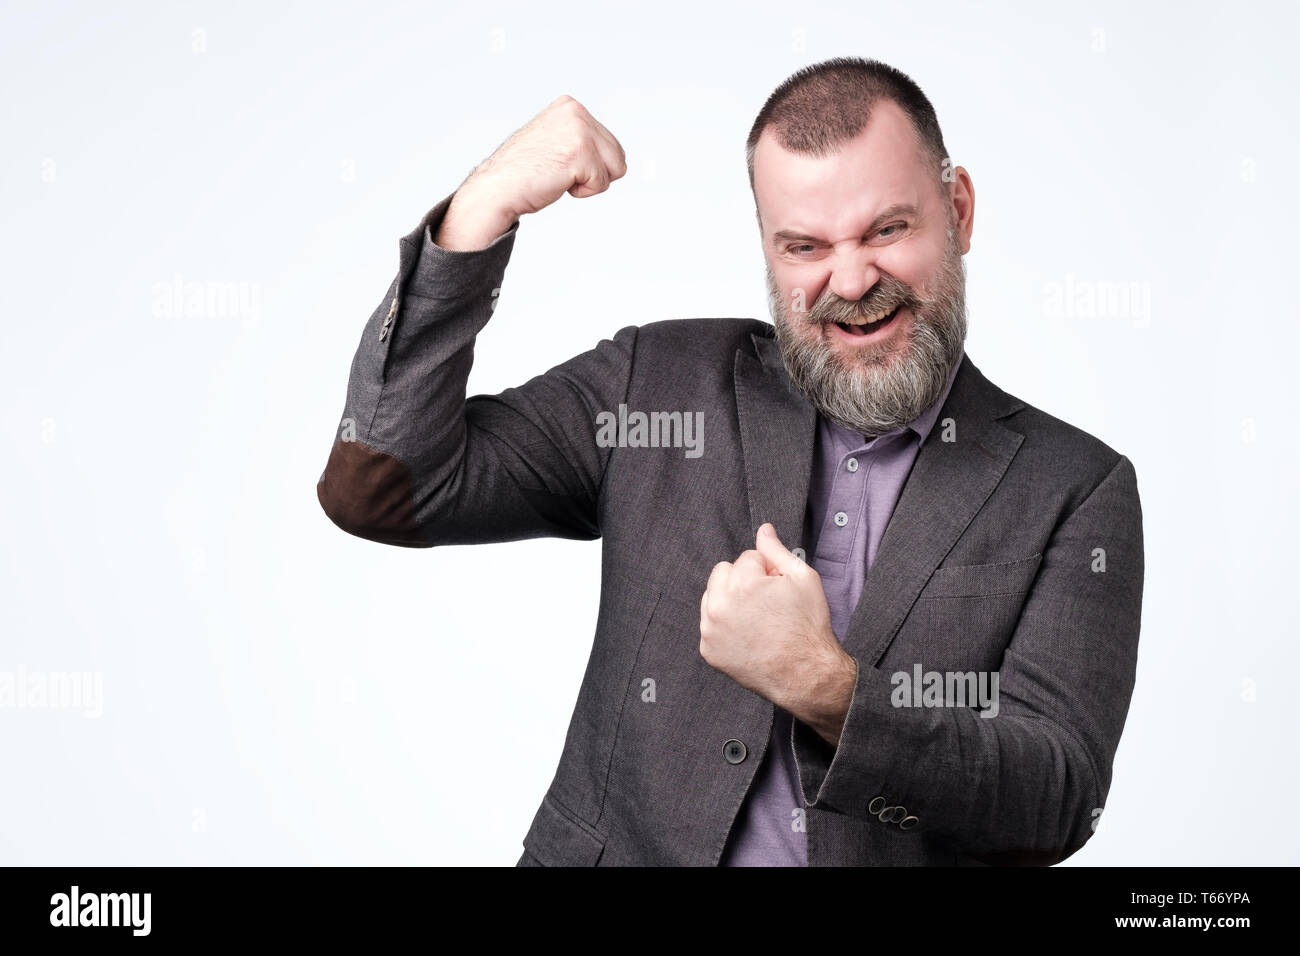 Positive mature guy showing his success boasting. Stock Photo